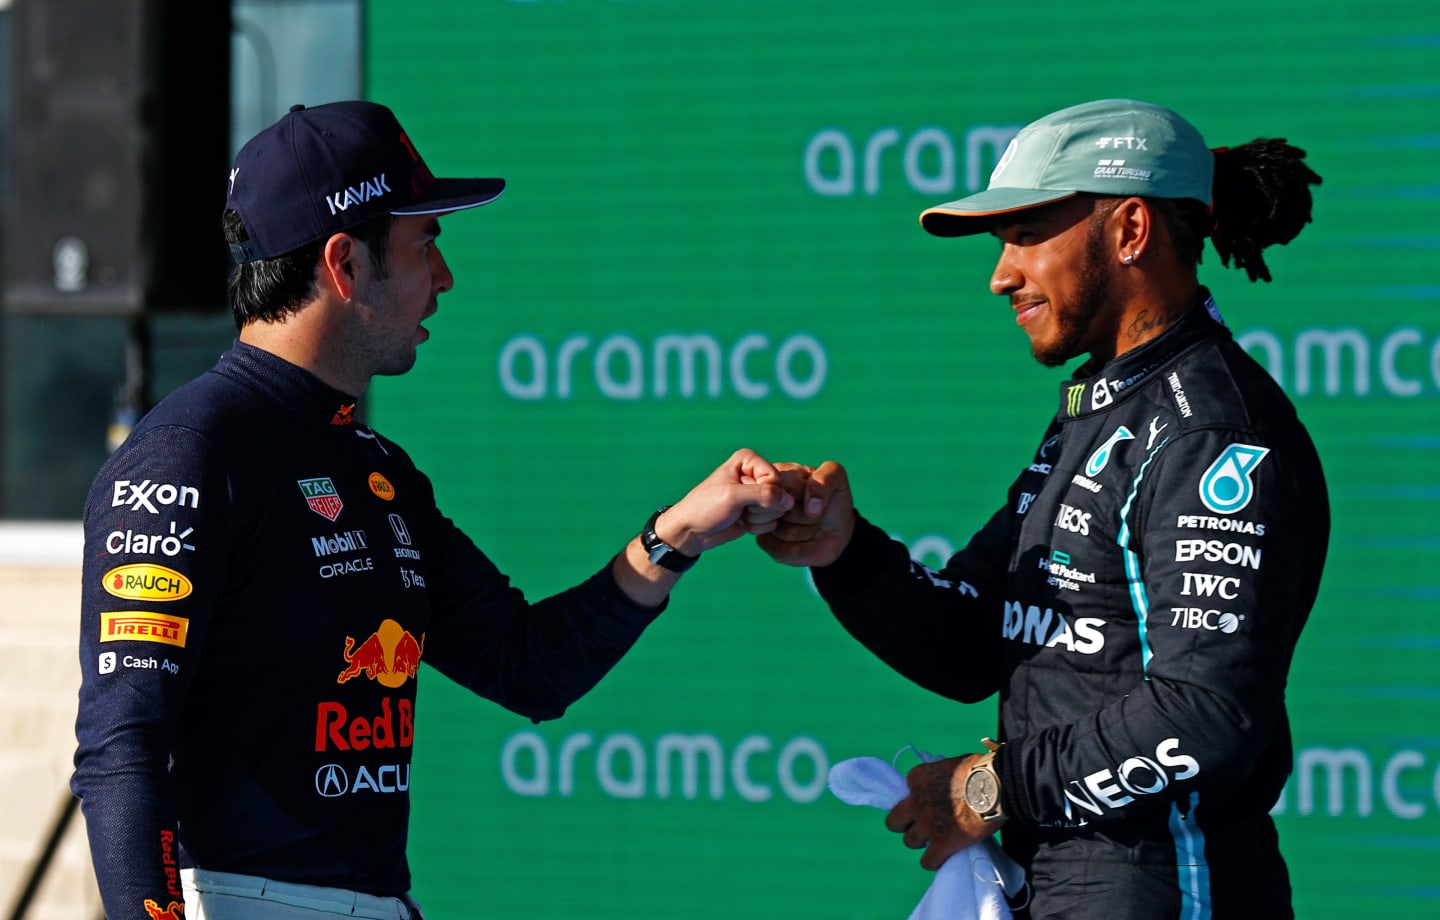 AUSTIN, TEXAS - OCTOBER 23: Second place qualifier Lewis Hamilton of Great Britain and Mercedes GP and third place qualifier Sergio Perez of Mexico and Red Bull Racing celebrate in parc ferme during qualifying ahead of the F1 Grand Prix of USA at Circuit of The Americas on October 23, 2021 in Austin, Texas. (Photo by Jared C. Tilton/Getty Images)